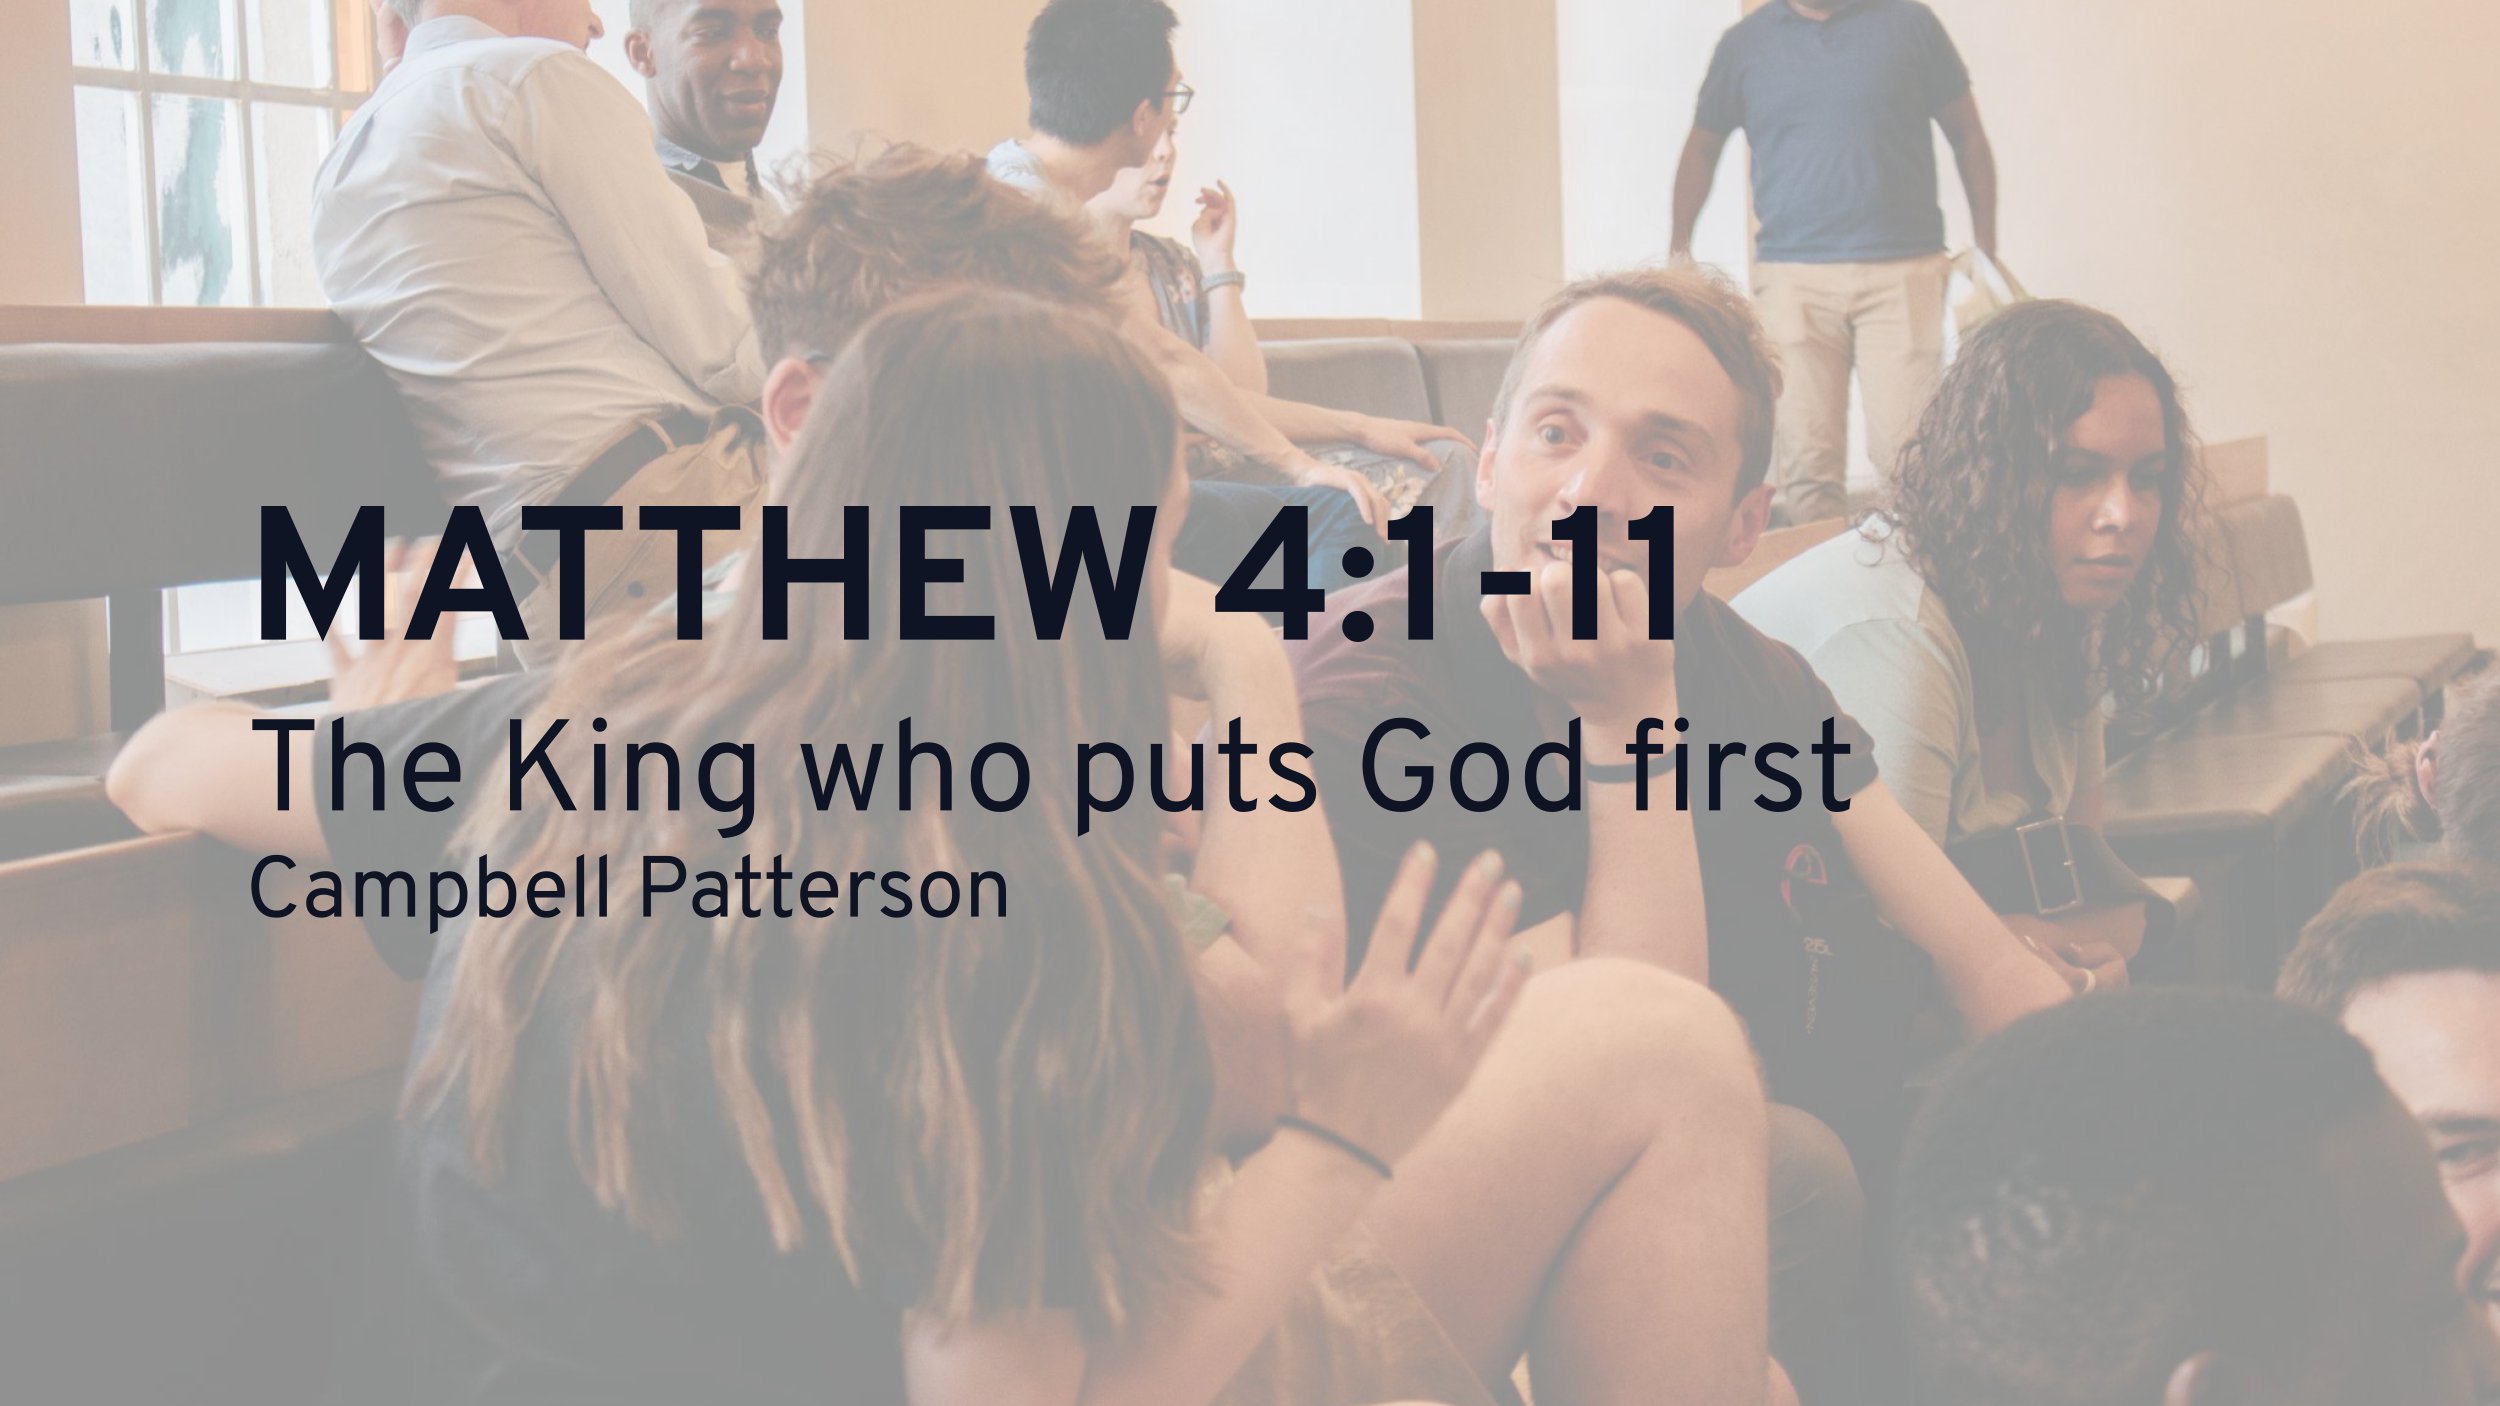 The King who puts God first